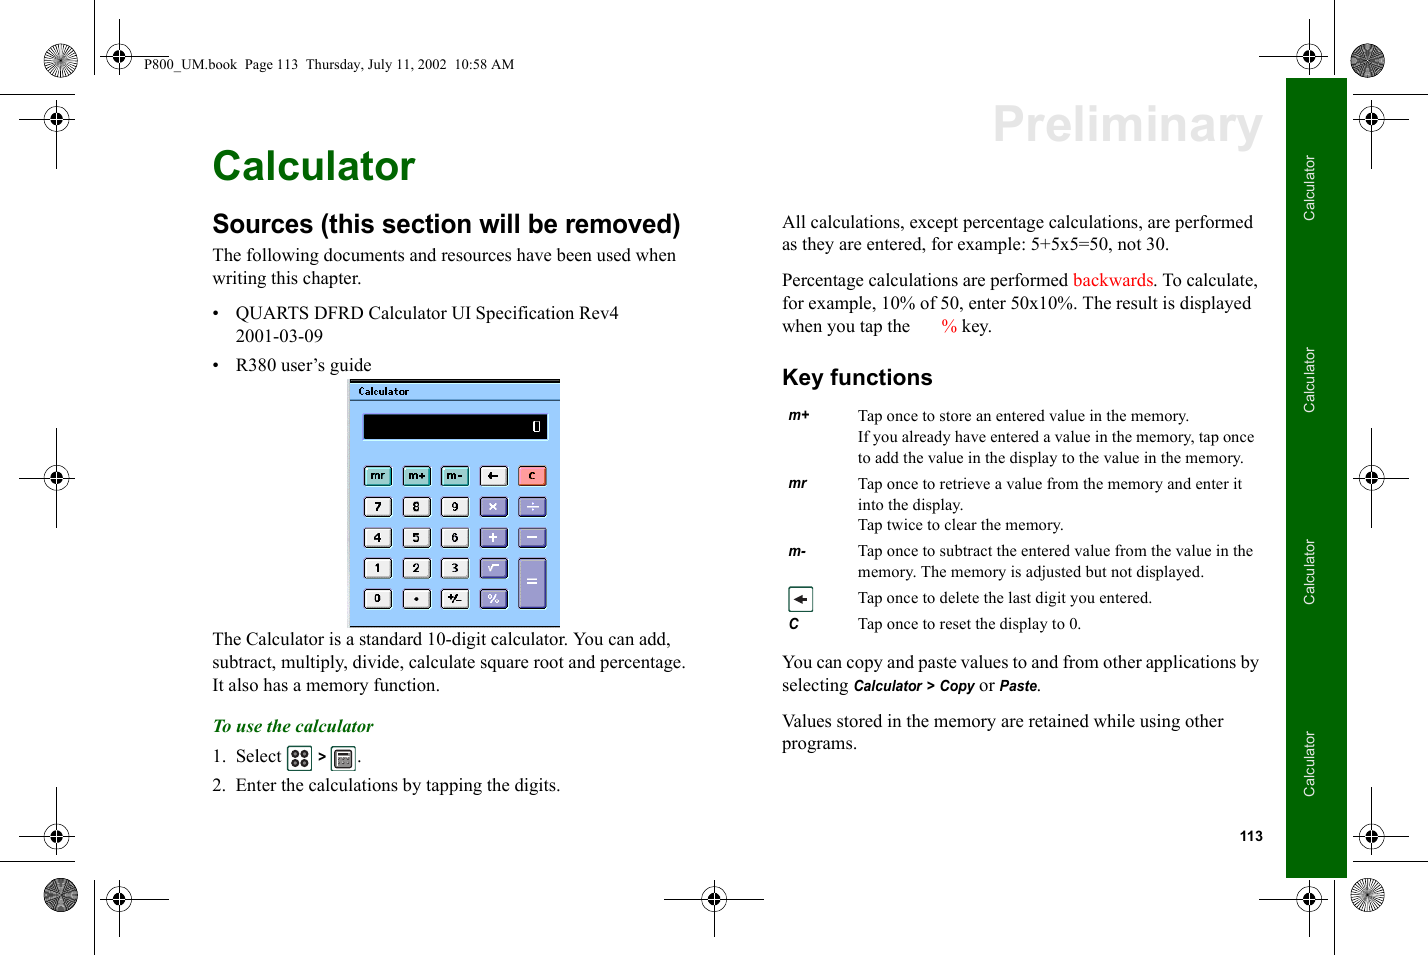 113CalculatorCalculatorCalculatorCalculatorPreliminaryCalculatorSources (this section will be removed)The following documents and resources have been used when writing this chapter.• QUARTS DFRD Calculator UI Specification Rev4 2001-03-09• R380 user’s guideThe Calculator is a standard 10-digit calculator. You can add, subtract, multiply, divide, calculate square root and percentage. It also has a memory function.To use the calculator1. Select  &gt; .2. Enter the calculations by tapping the digits.All calculations, except percentage calculations, are performed as they are entered, for example: 5+5x5=50, not 30.Percentage calculations are performed backwards. To calculate, for example, 10% of 50, enter 50x10%. The result is displayed when you tap the  % key.Key functionsYou can copy and paste values to and from other applications by selecting Calculator &gt; Copy or Paste.Values stored in the memory are retained while using other programs.m+Tap once to store an entered value in the memory.If you already have entered a value in the memory, tap once to add the value in the display to the value in the memory.mrTap once to retrieve a value from the memory and enter it into the display.Tap twice to clear the memory.m-Tap once to subtract the entered value from the value in the memory. The memory is adjusted but not displayed.Tap once to delete the last digit you entered.C  Tap once to reset the display to 0.P800_UM.book  Page 113  Thursday, July 11, 2002  10:58 AM